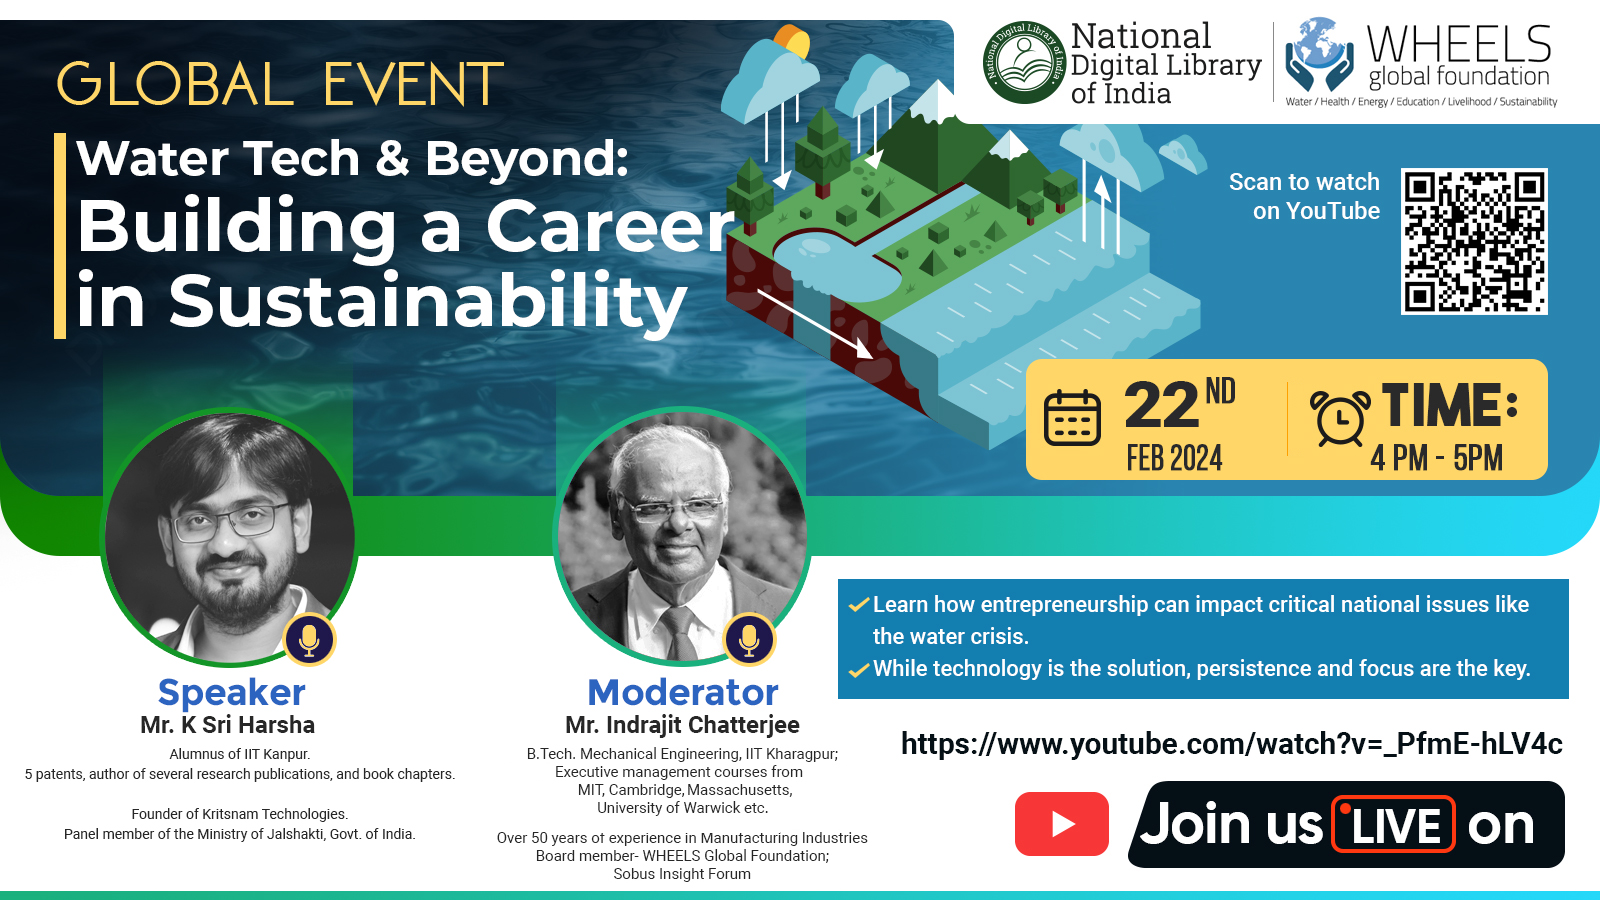 Water Tech & Beyond: Building a Career in Sustainability